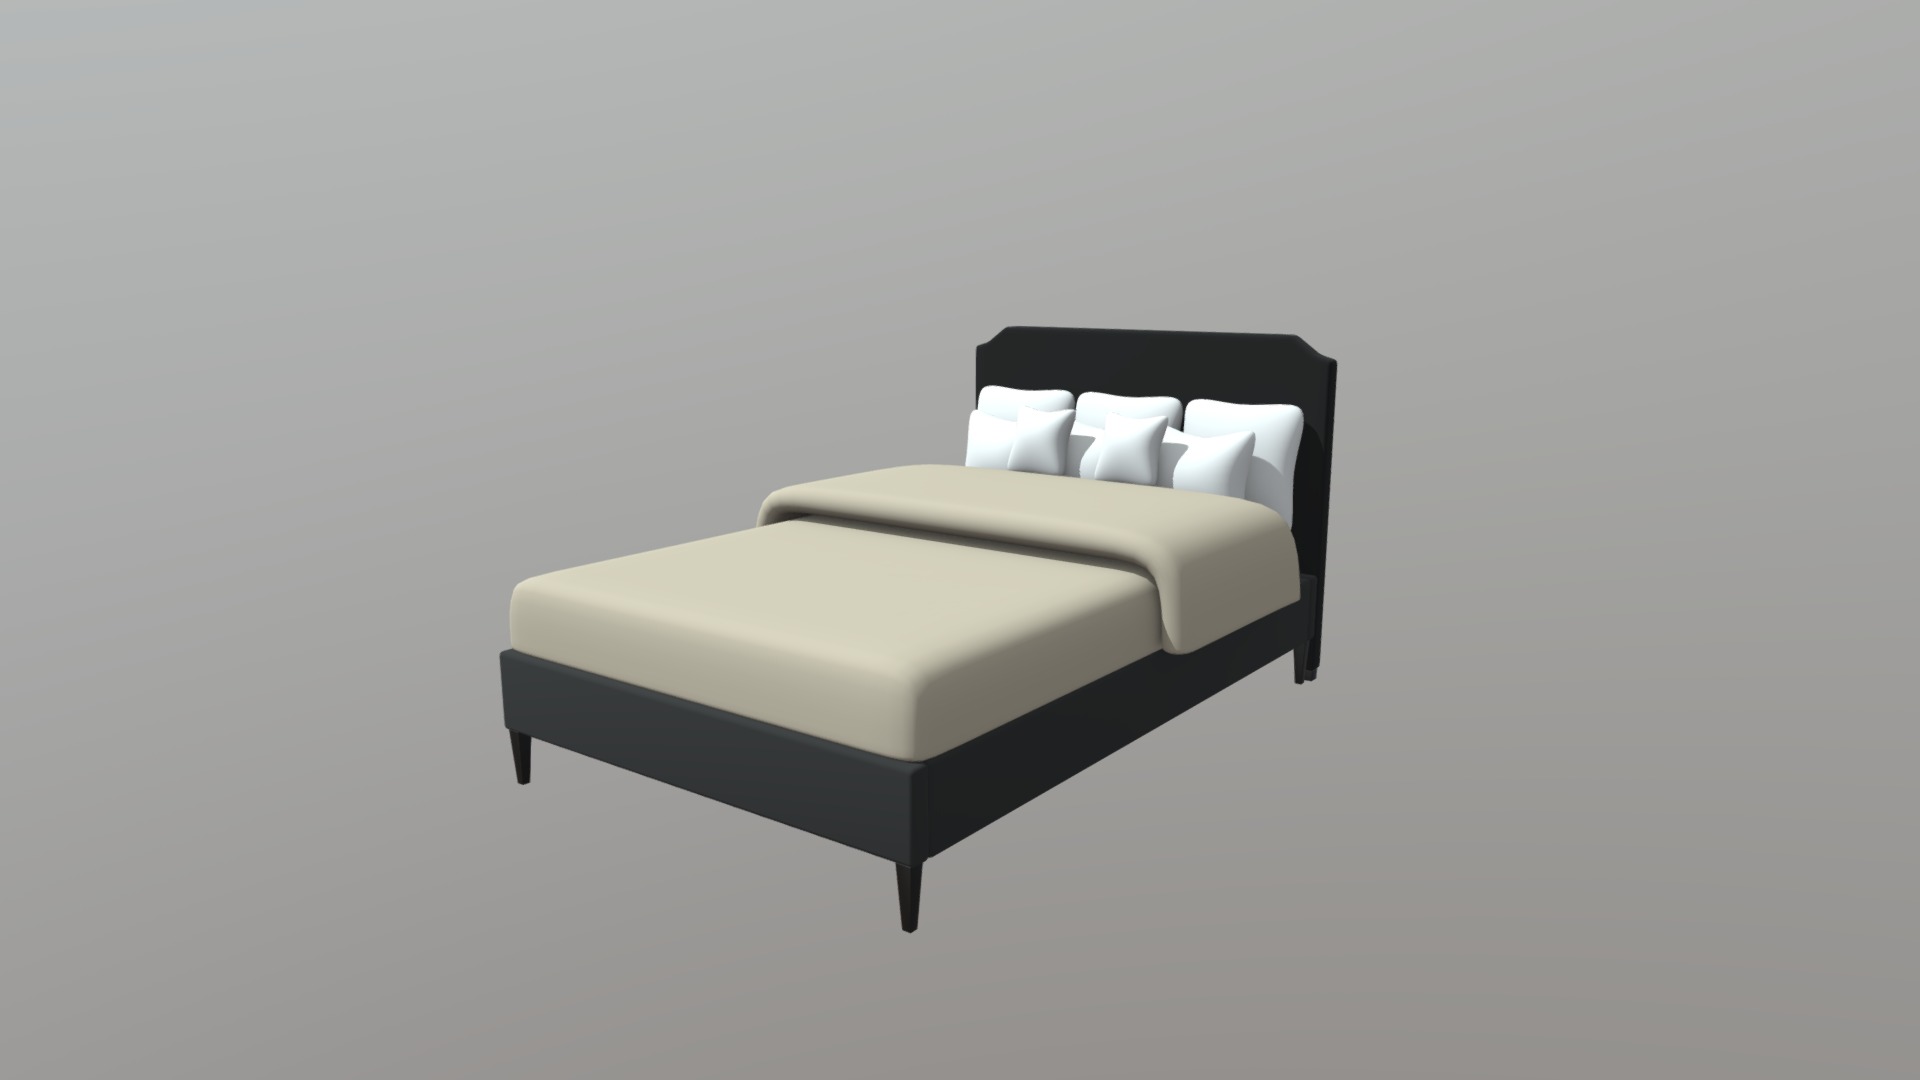 Master Bedroom Bed that was created using Blender. This model a stand alone model that can be found in my Master Bedroom Asset Pack or my Master Bedroom Scene Pack. It is sold separately in the case that someone is interested in this particular model. It uses the metalness workflow and is PBR ready.

Features:




Includes 5 PBR 2K textures in PNG format

Includes 1 texture UVLayout to show how the model has been unwrapped

The model has been manually unwrapped, with matching PBR textures to their UVMap

The model has been organized neatly in its zip archive and labeled accordingly

Native blend files are included with pre-applied textures

Models is exported in 4 file formats (FBX, OBJ, 3DS, DAE/Collada)

Included Textures:




AO, Diffuse, Roughness, Gloss, Normal

UVLayout

The source file that is uploaded is for demonstration use and is uploaded in FBX format. In the additional file you will find all model exports and the textures that go along with them 3d model